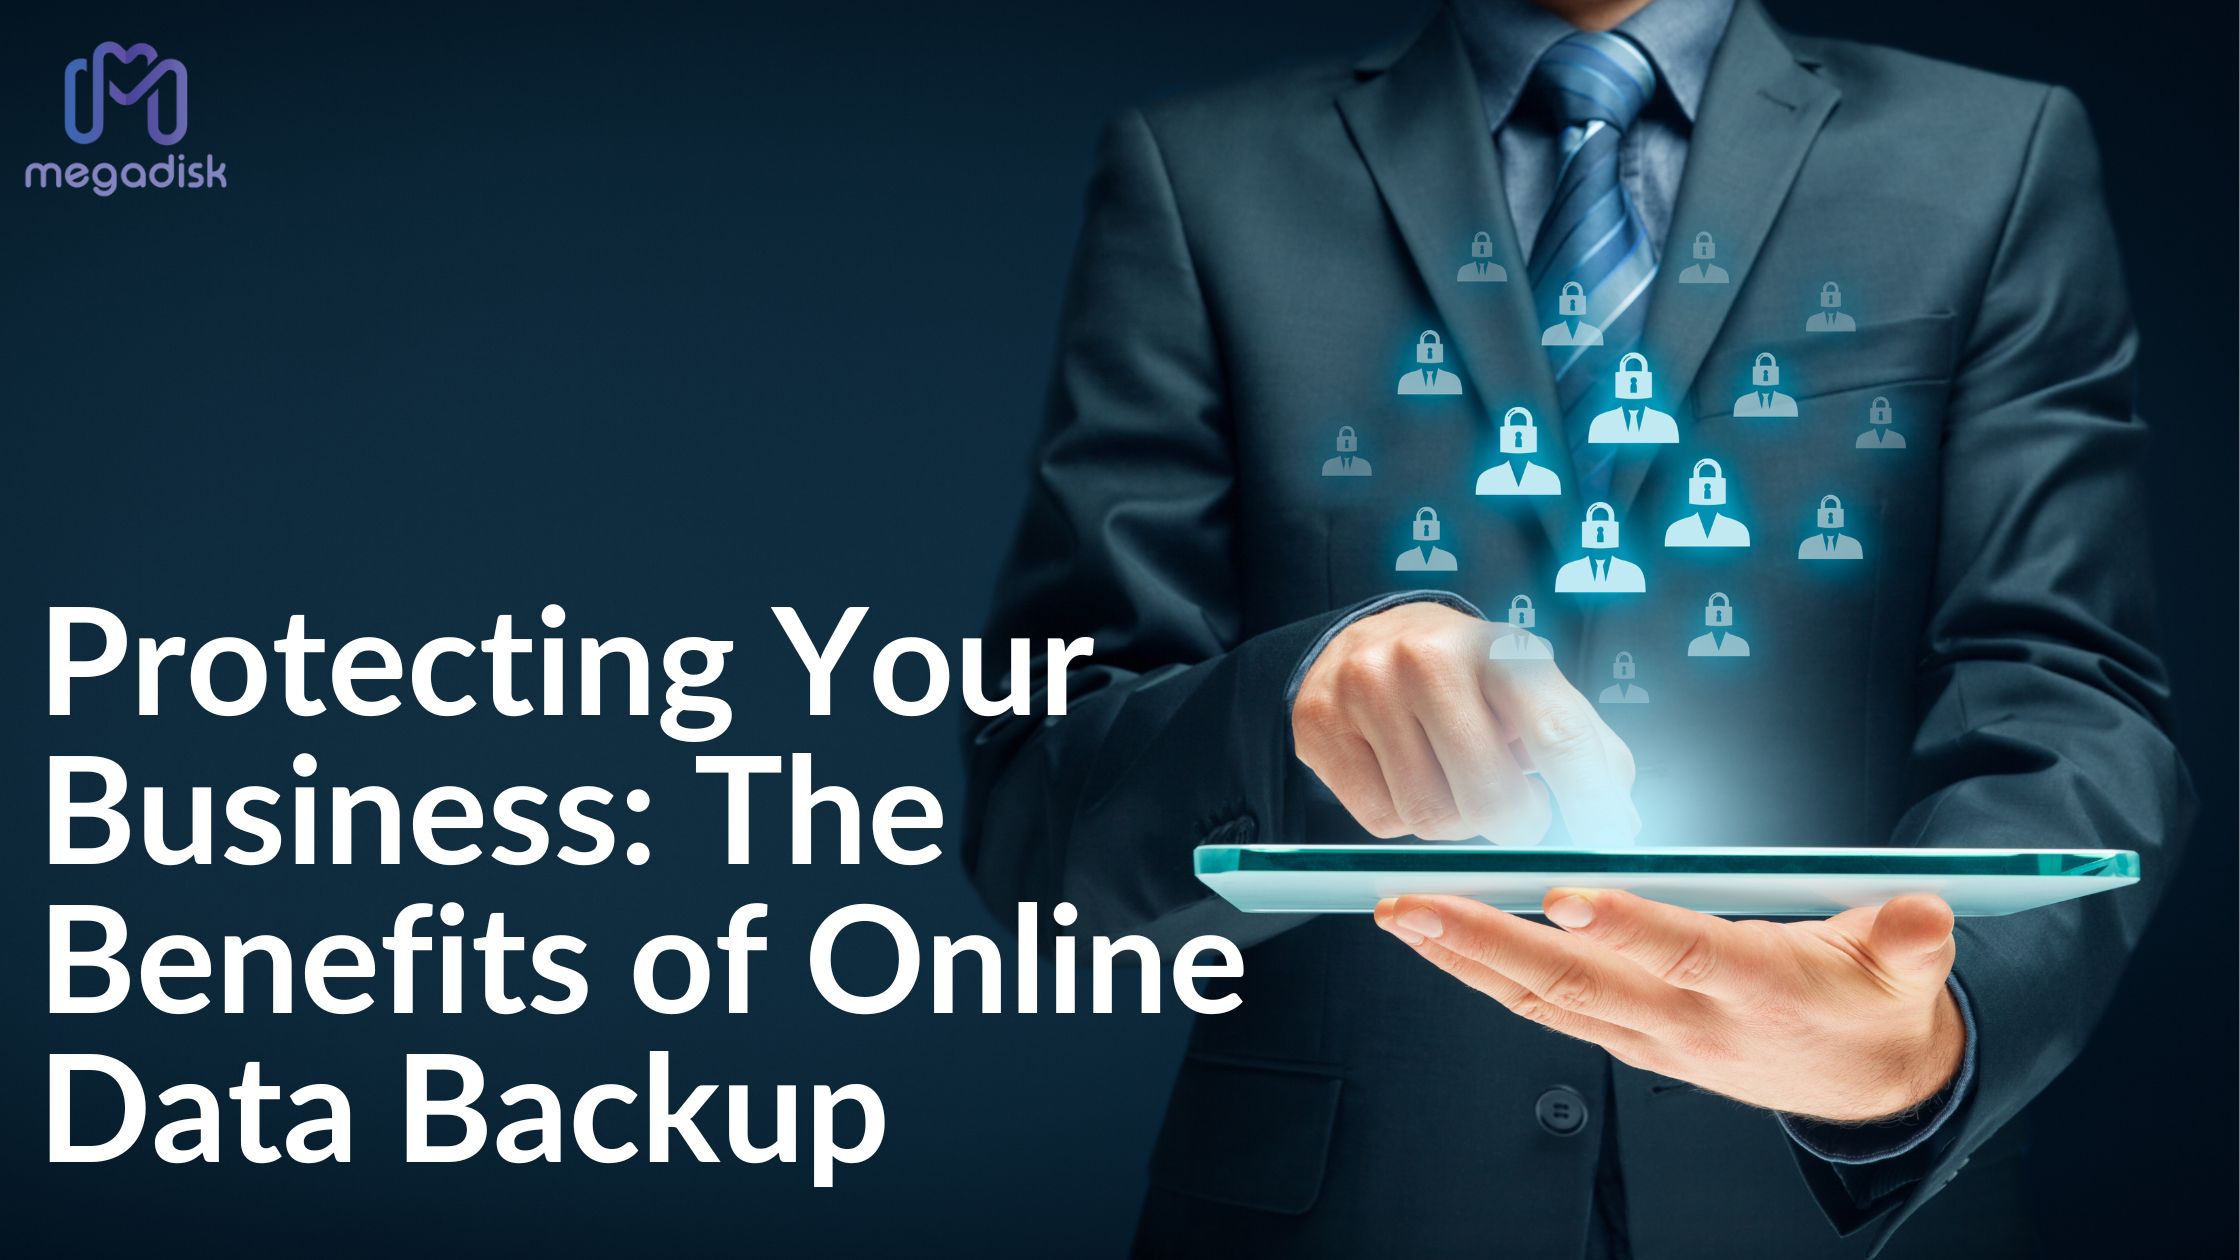 Protecting Your Business: The Benefits of Online Data Backup